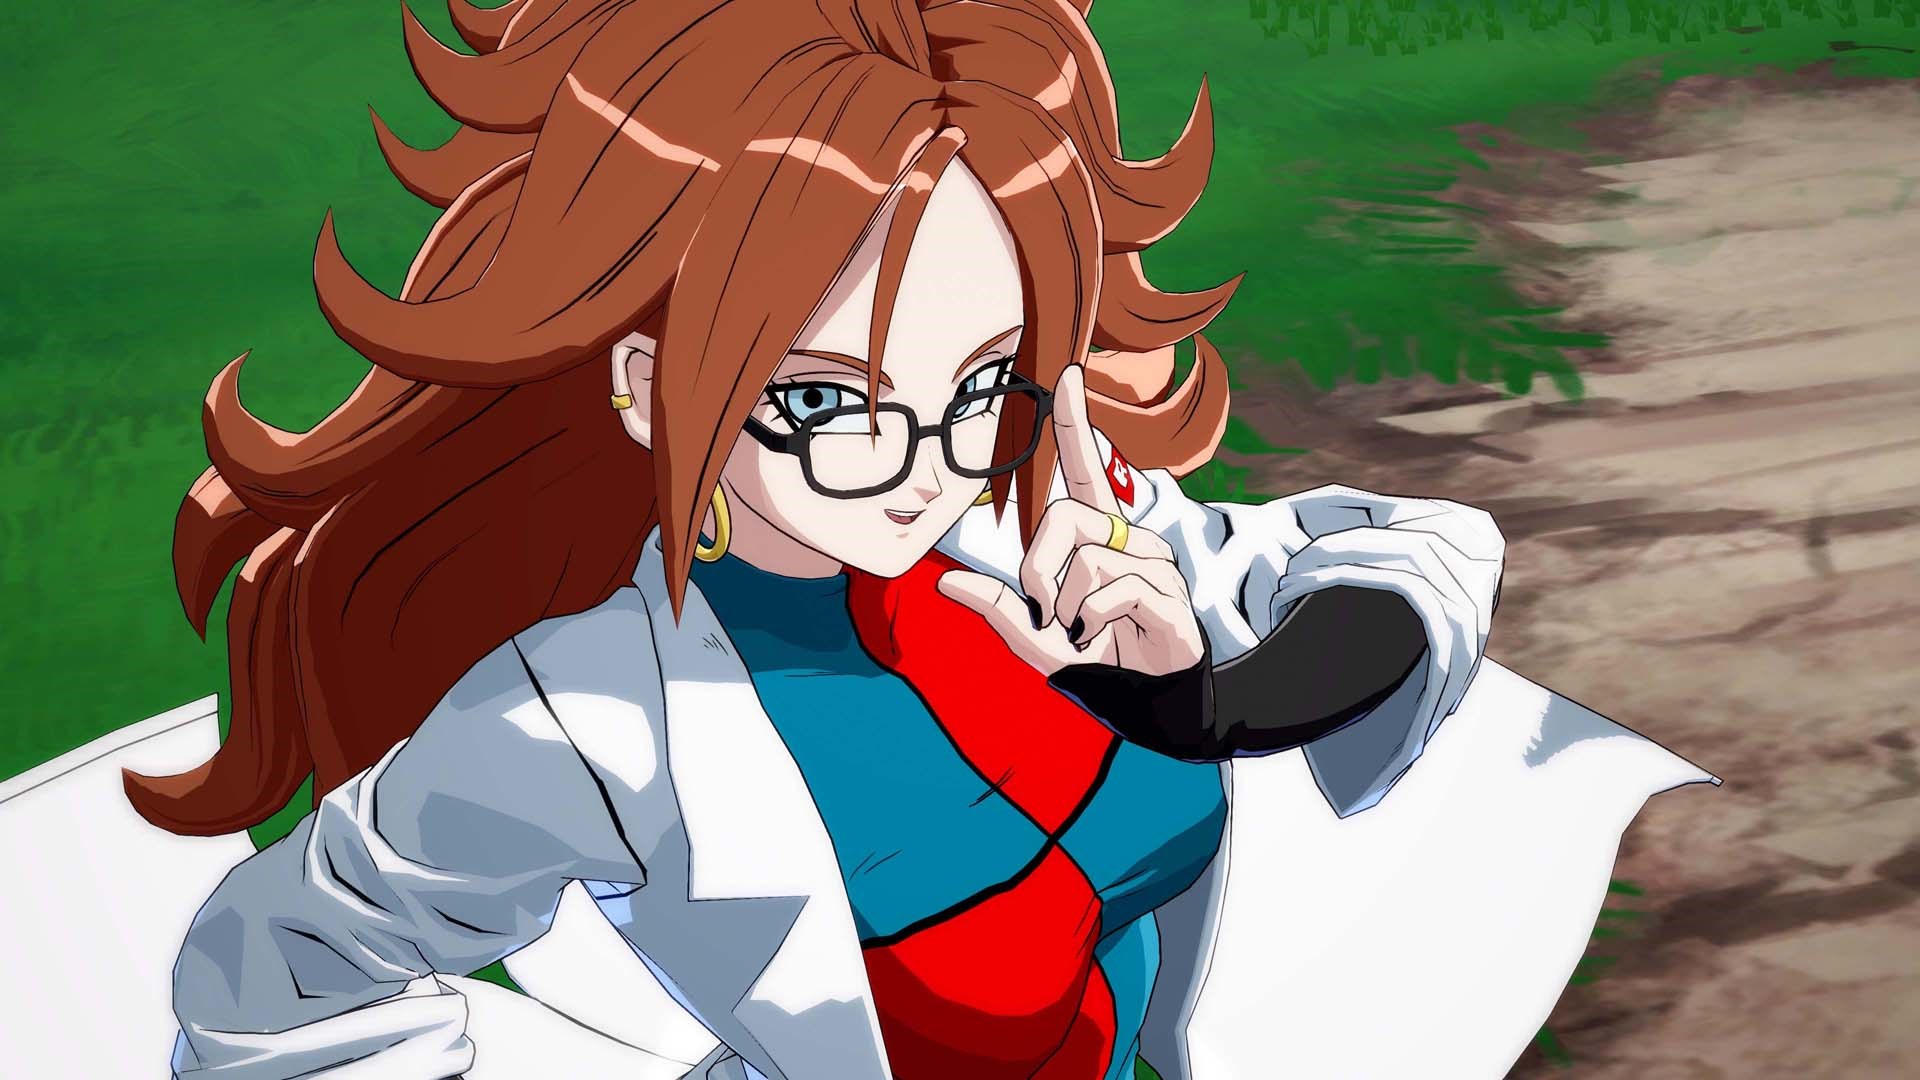 Android 21 - wide 4